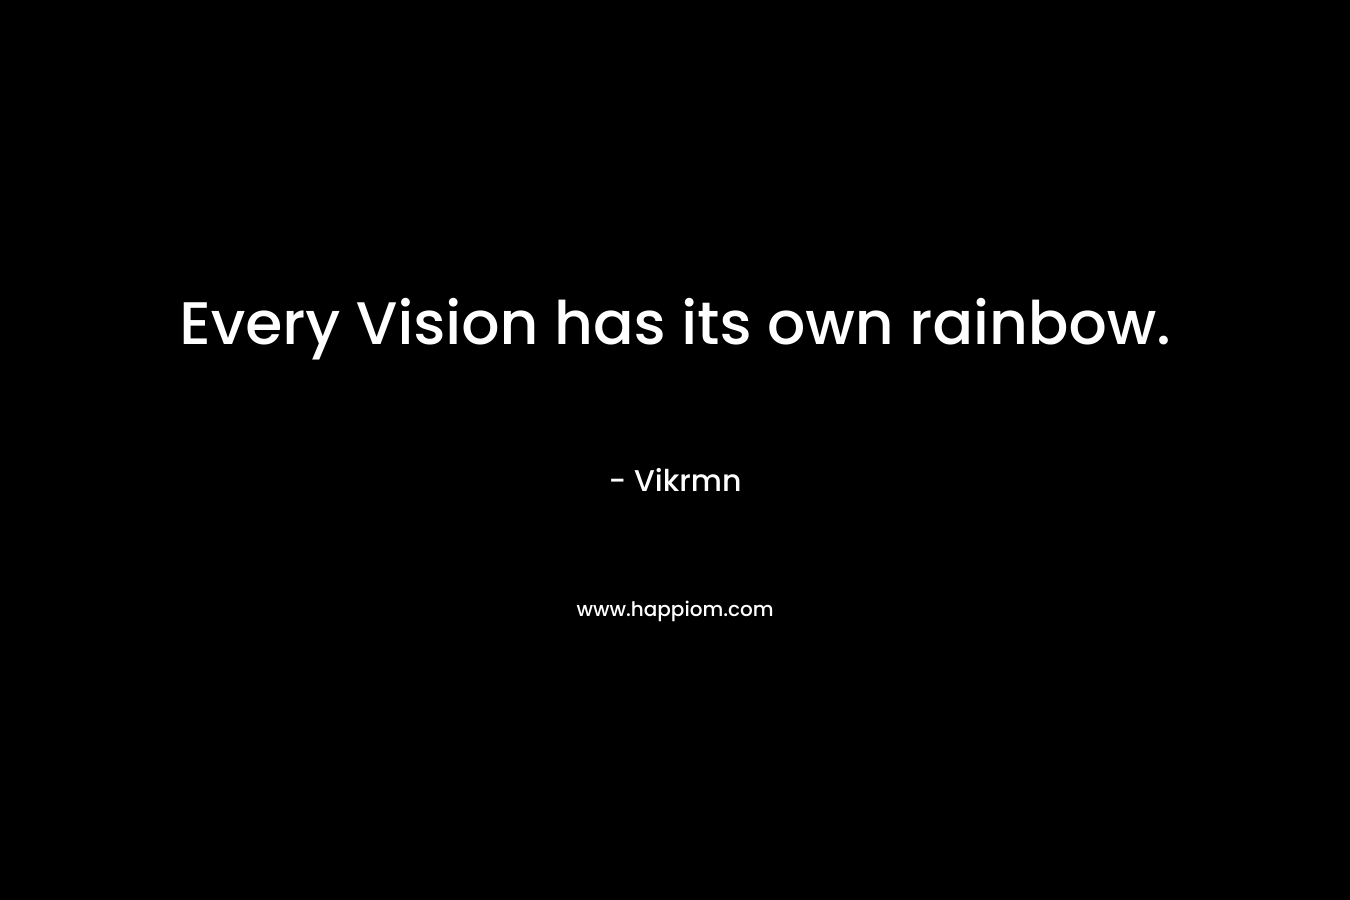 Every Vision has its own rainbow.